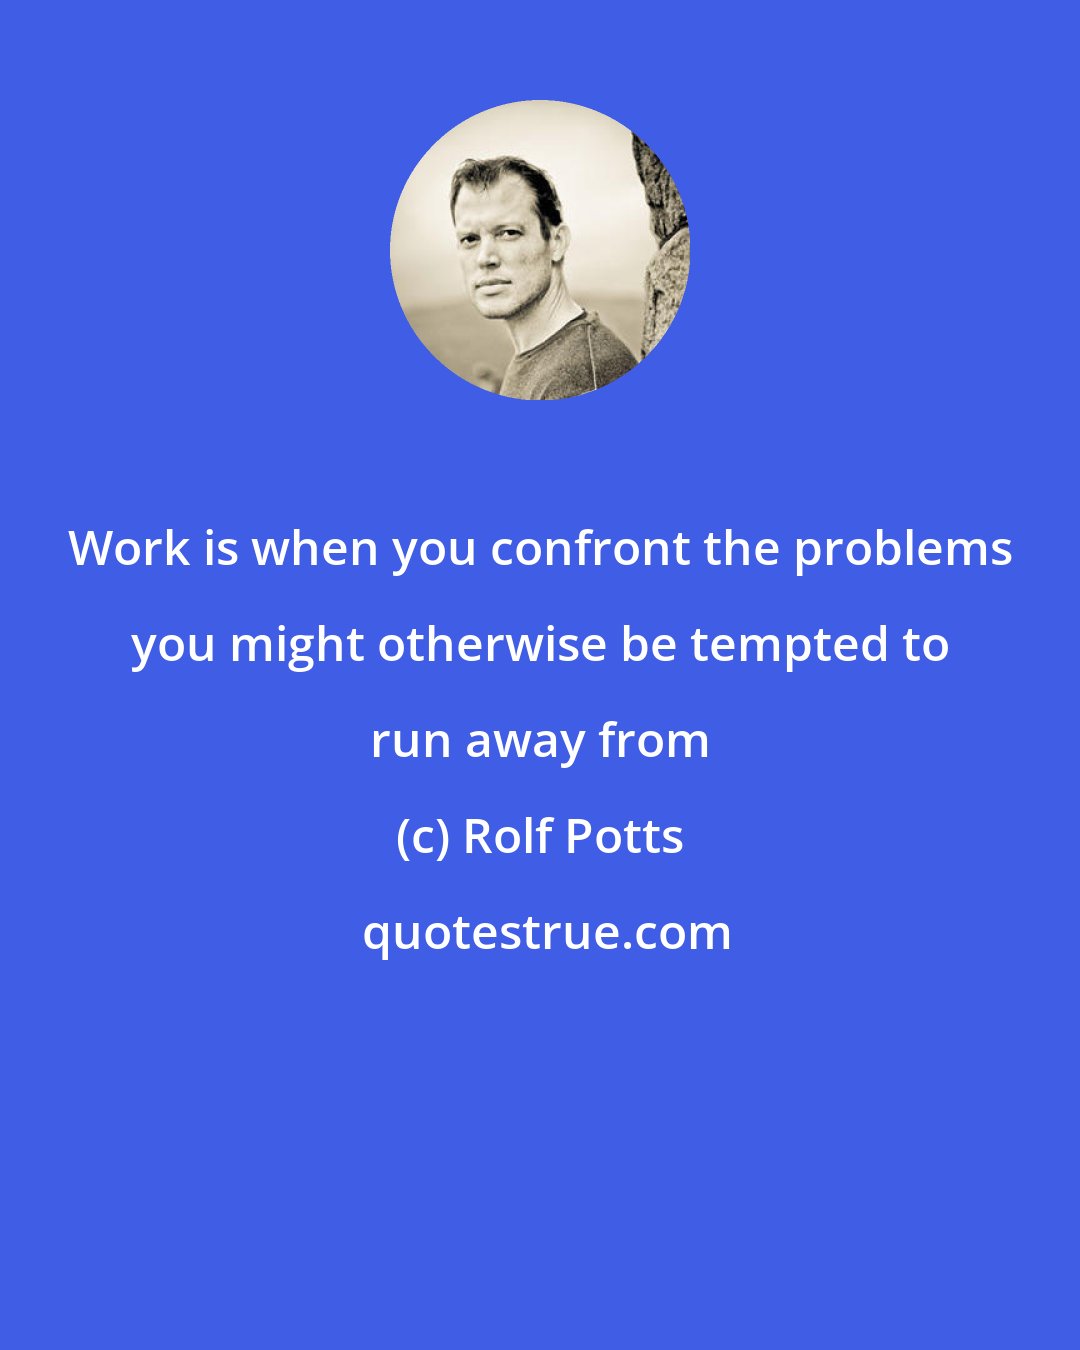 Rolf Potts: Work is when you confront the problems you might otherwise be tempted to run away from